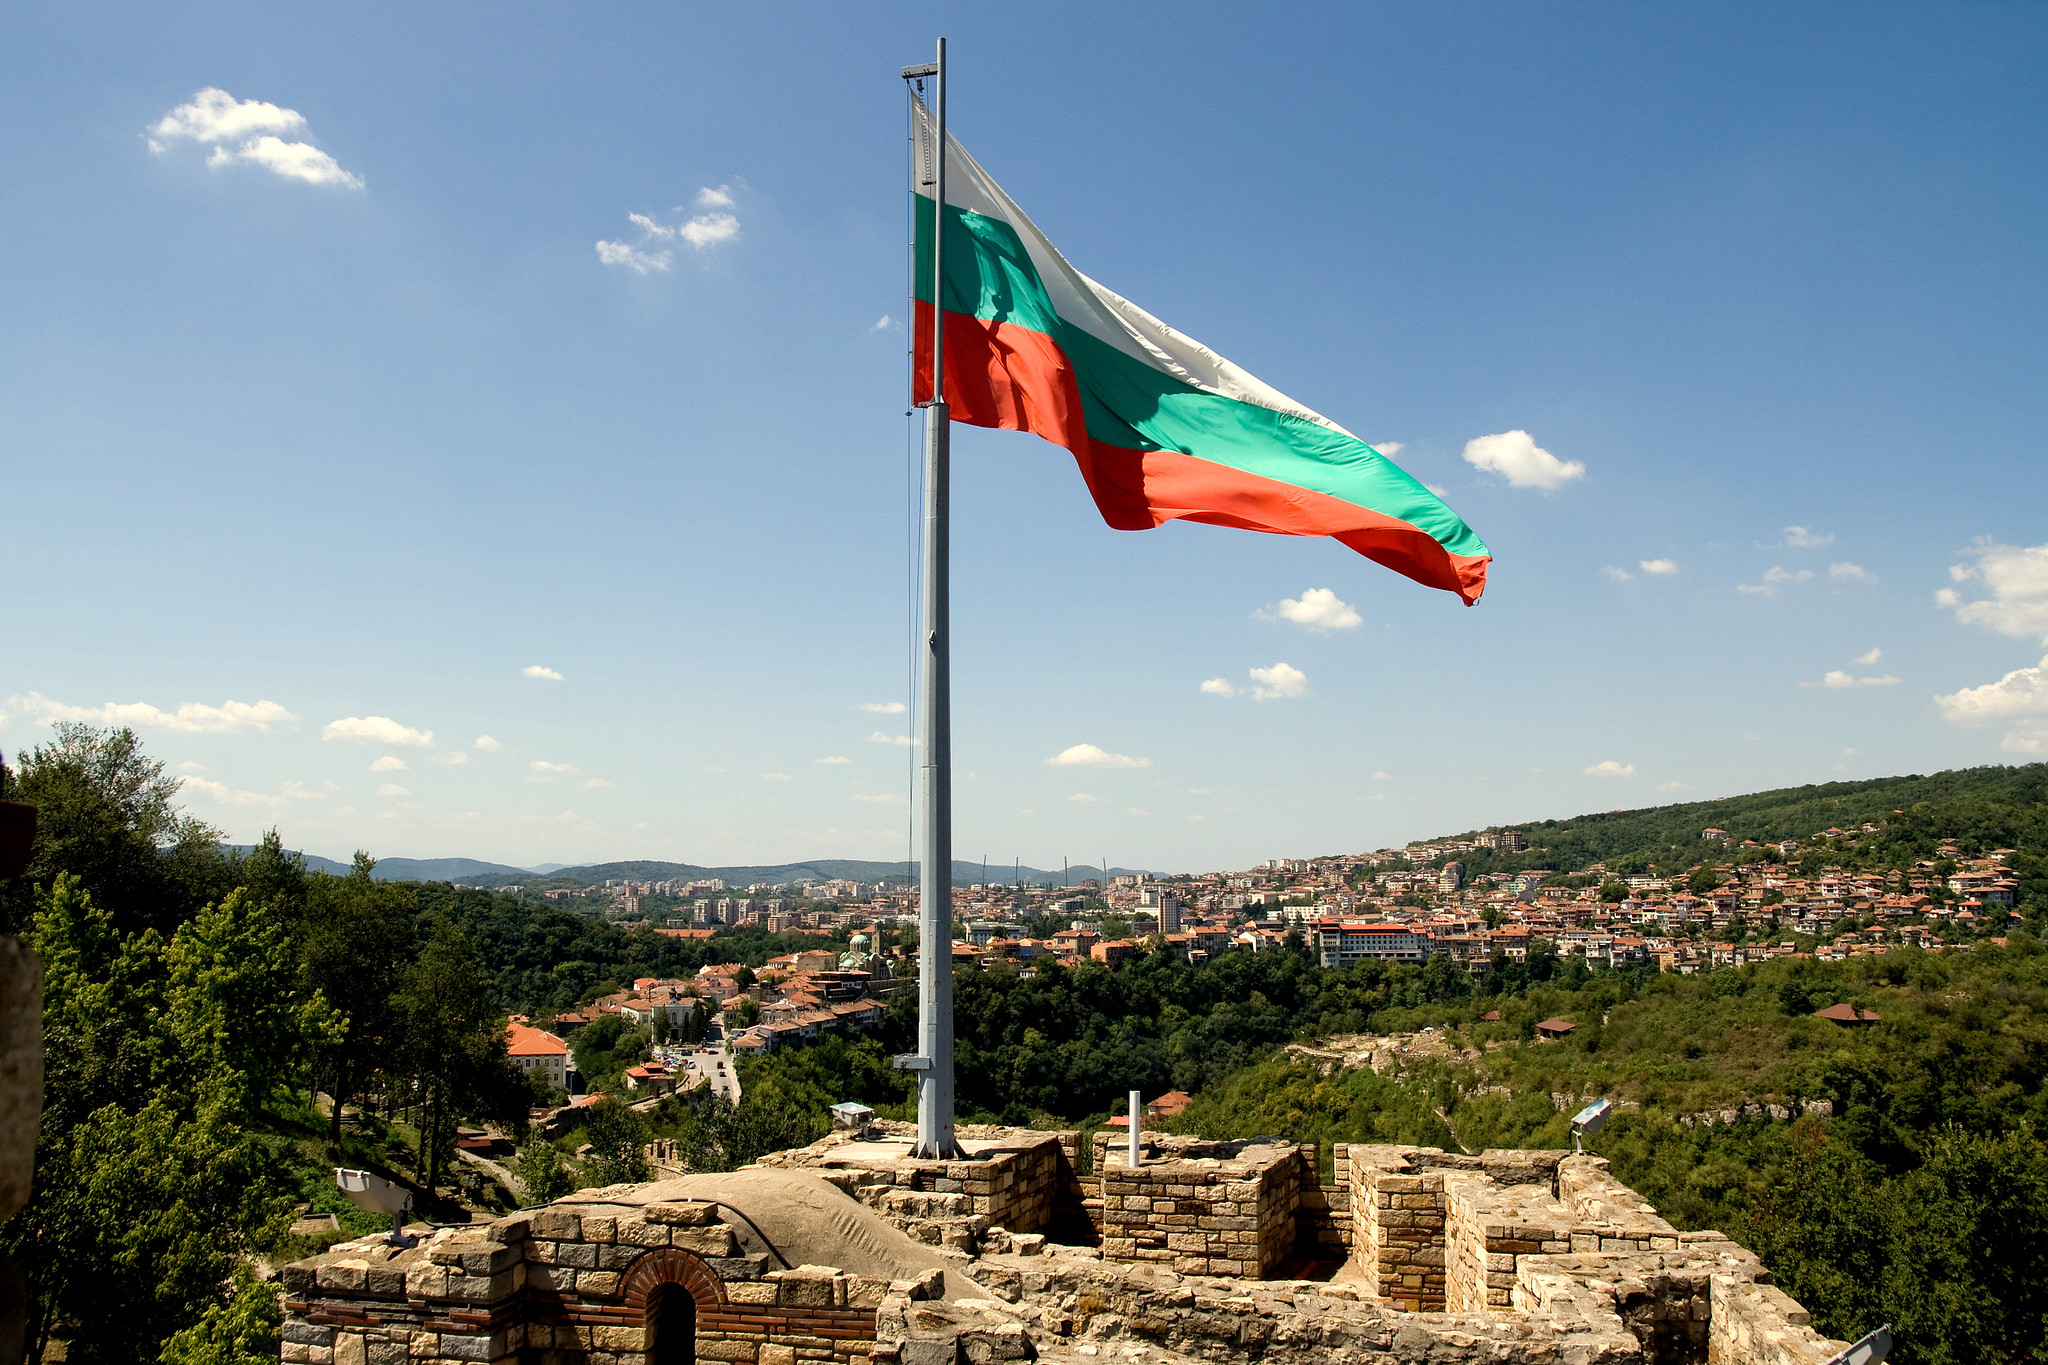 Bulgaria’s COVID-19 Crossroad Showed Need to Protect Journalists, Whistleblowers